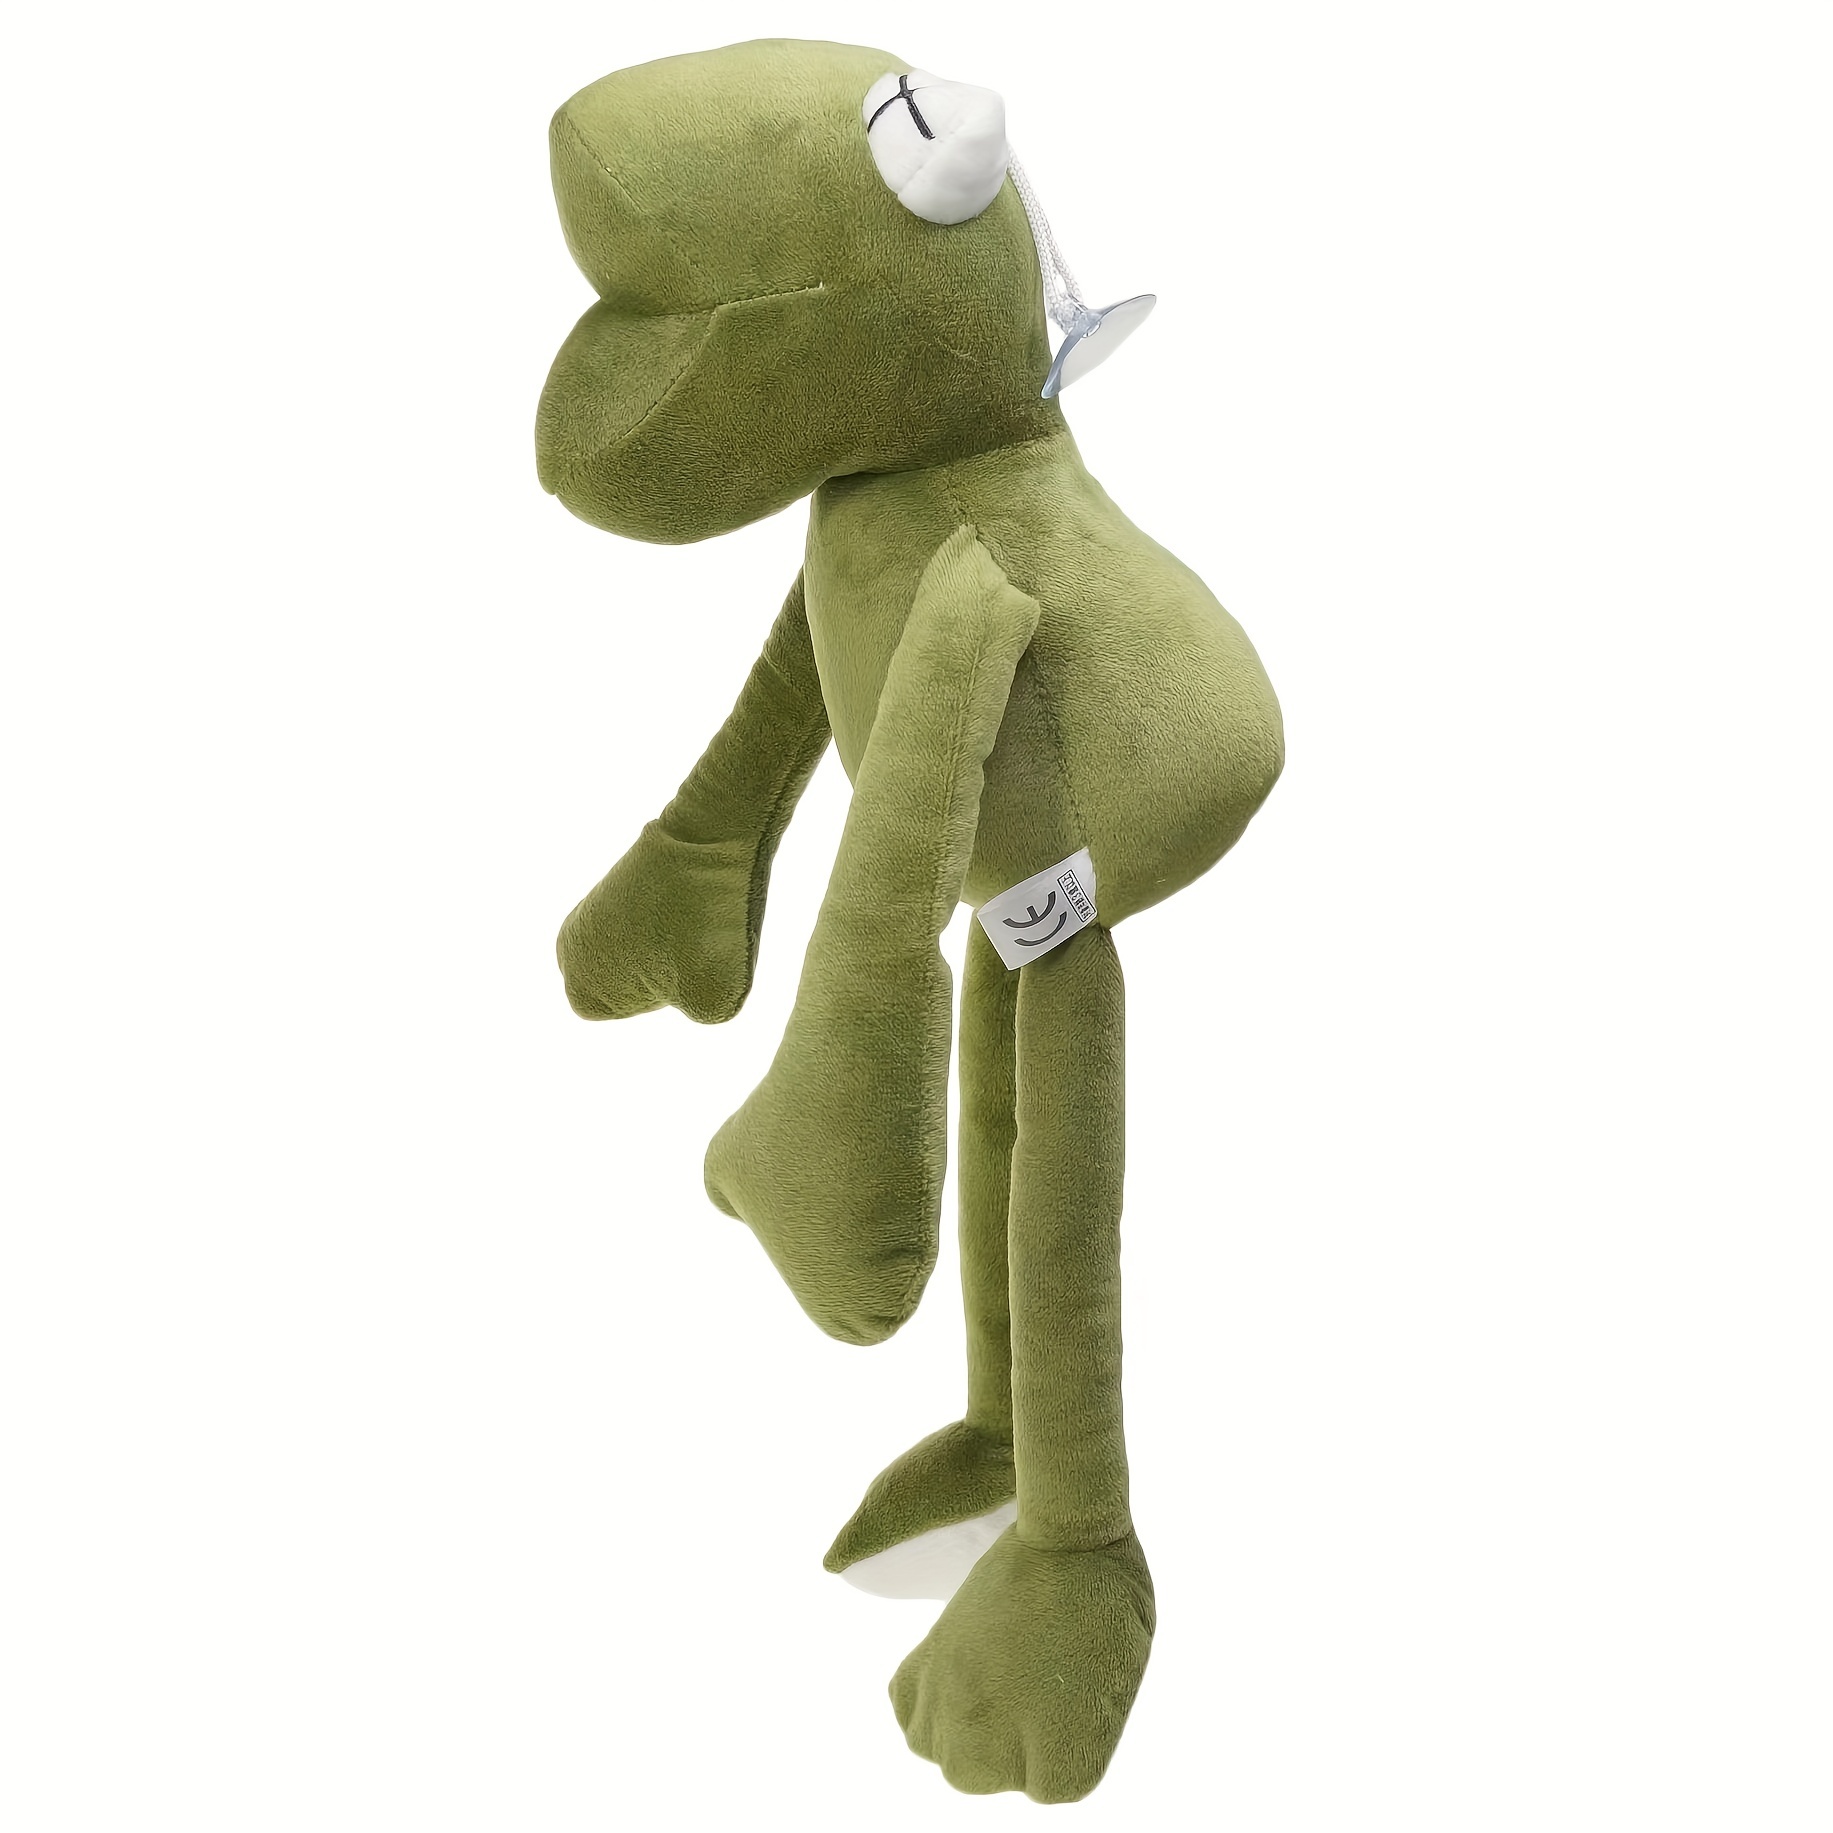 Kermit Frog Plush Toy Stuffed Plush Toy Gifts for Boys and Girls